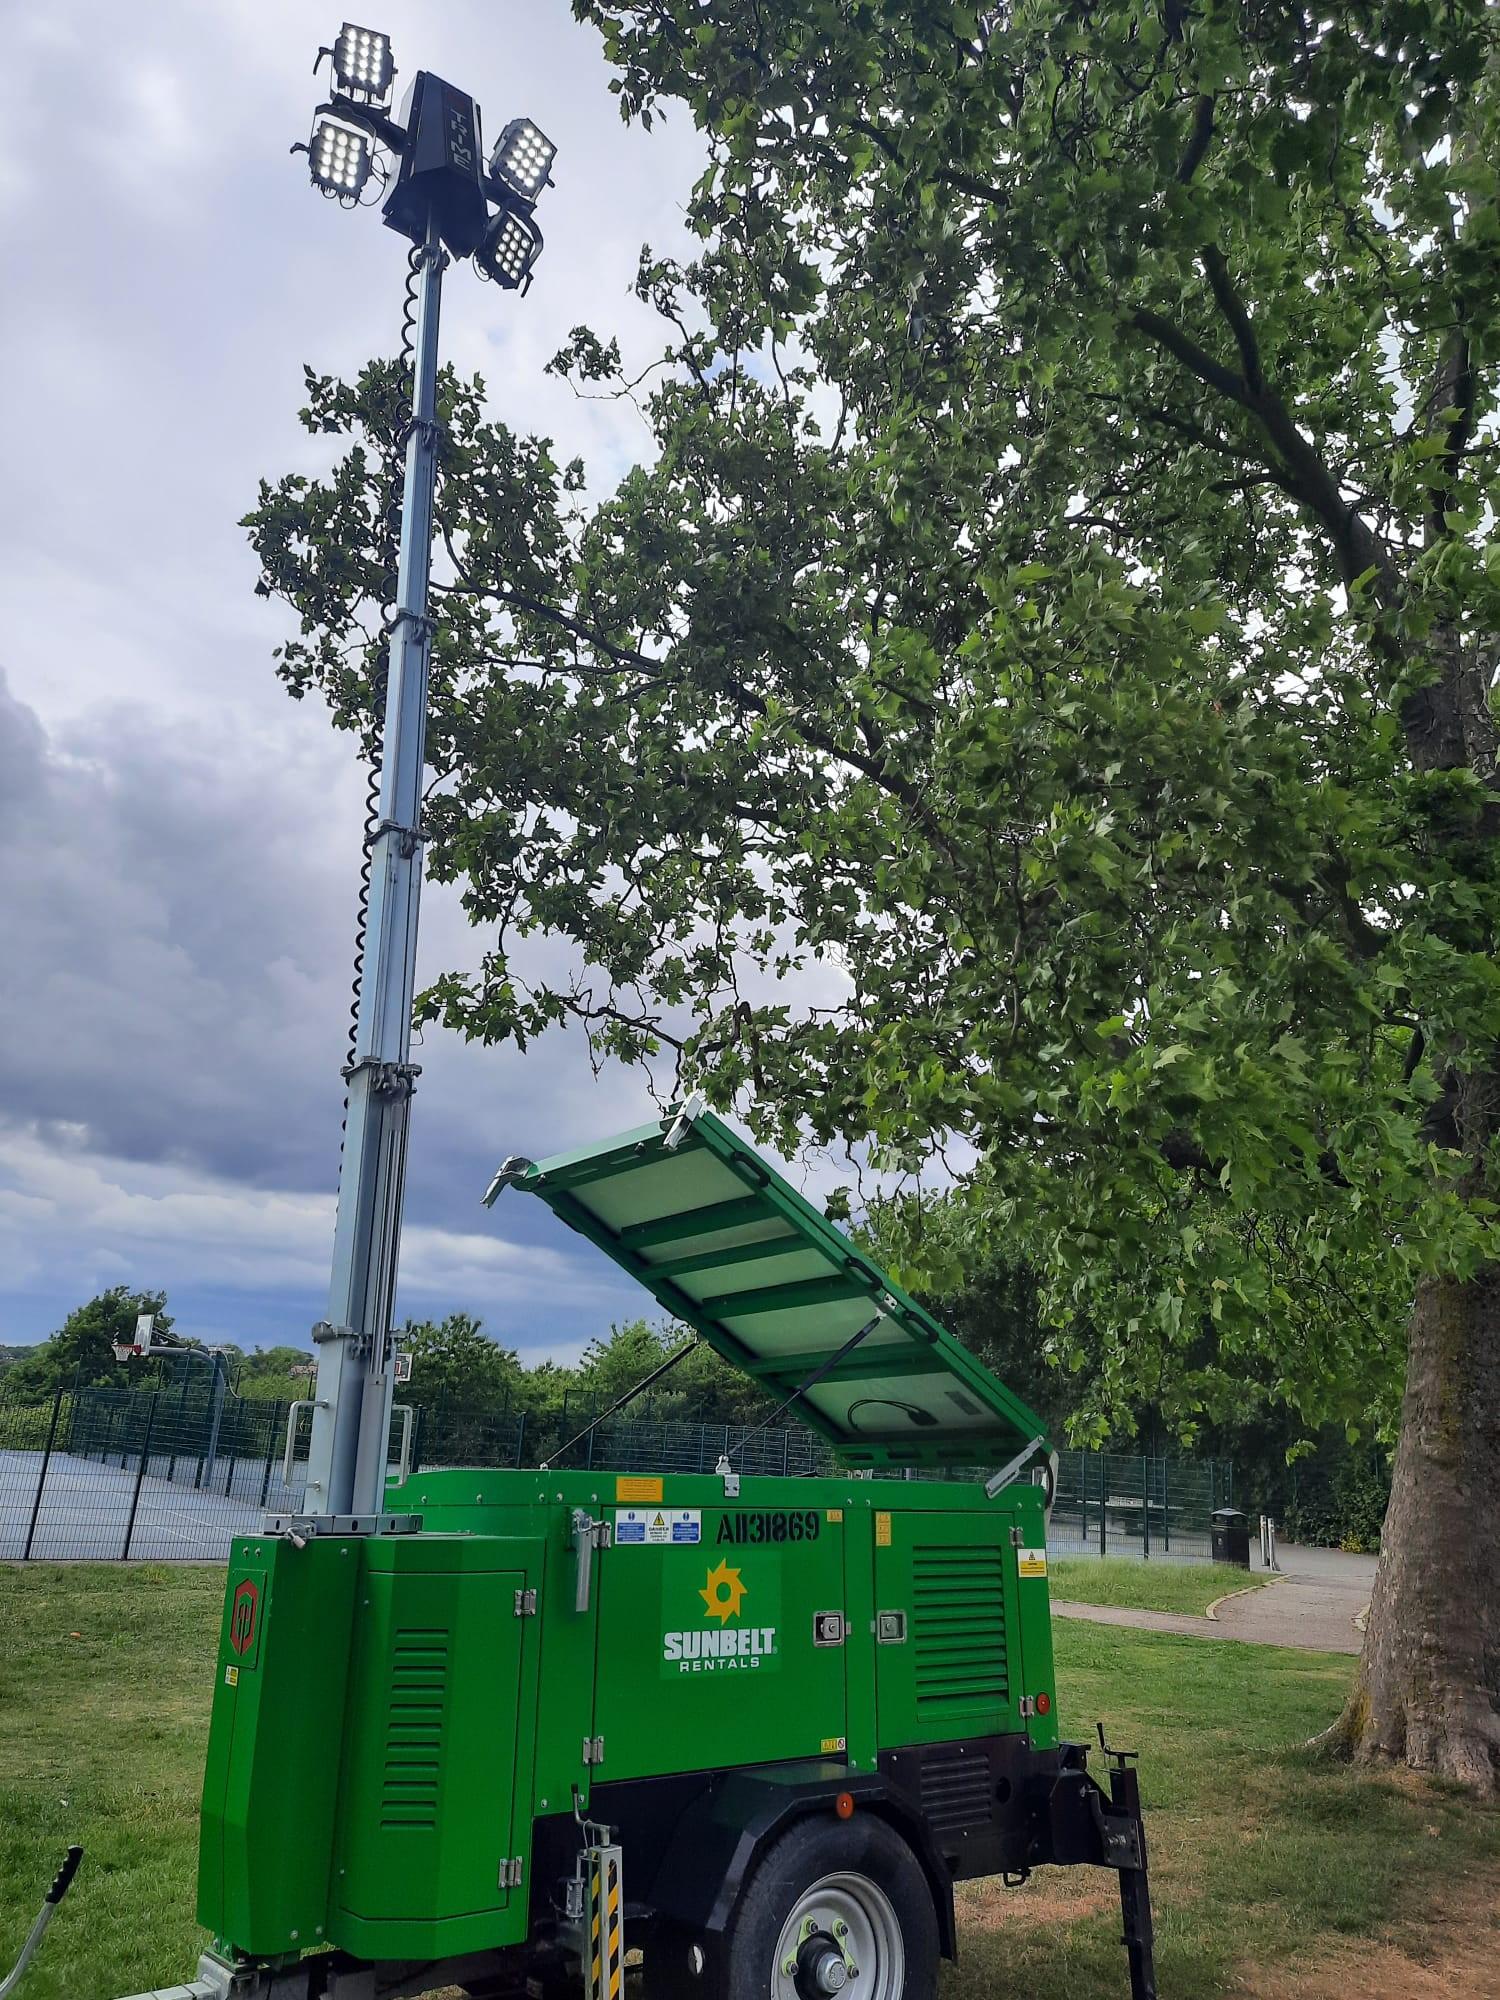 Picture of an overhead temporary lighting unit in Finsbury Park.